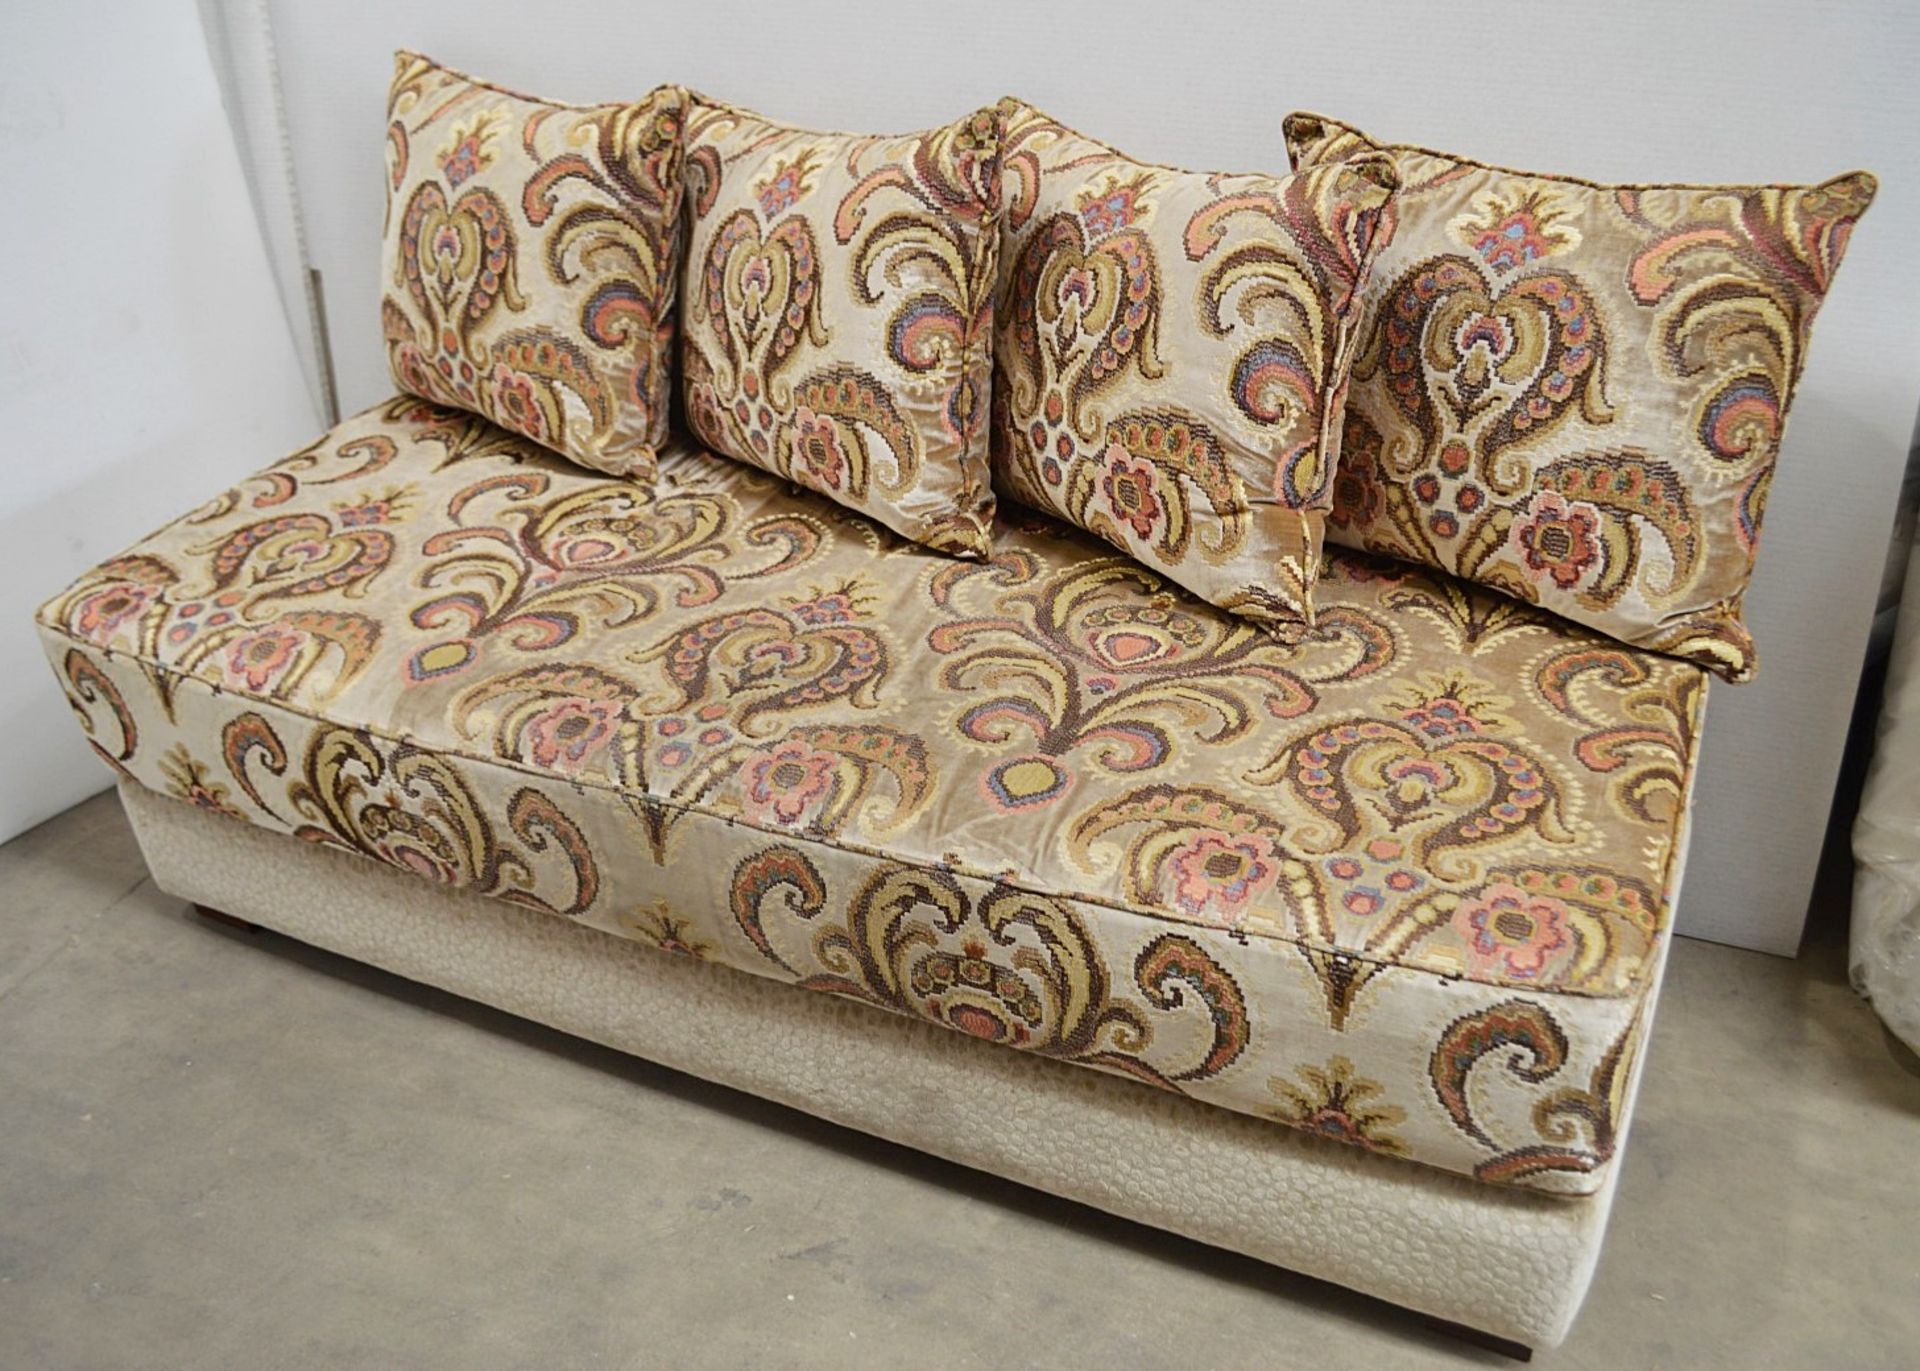 1 x Rectangular 1.7 Metre Moroccan-style Seating Bench With Matching Footstool And 5 x Scatter - Image 3 of 7